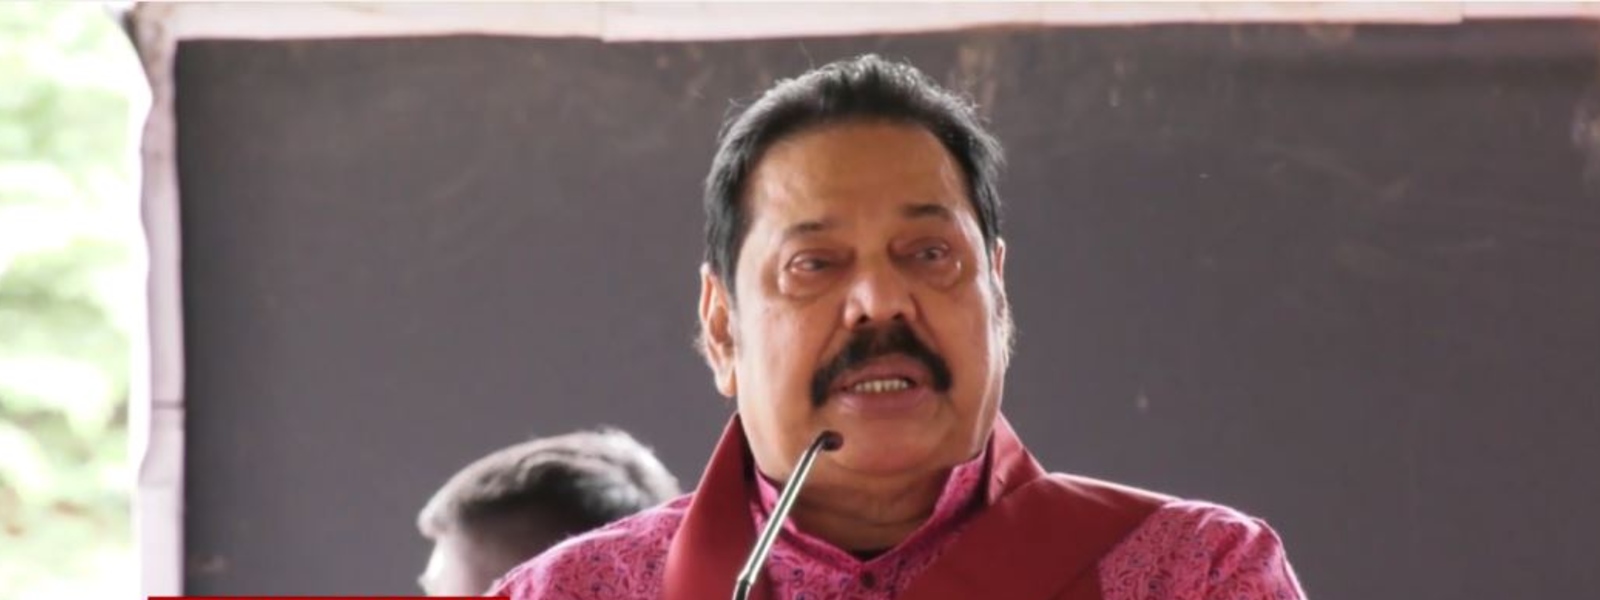 Cast your vote early in the day, says PM Mahinda Rajapaksa